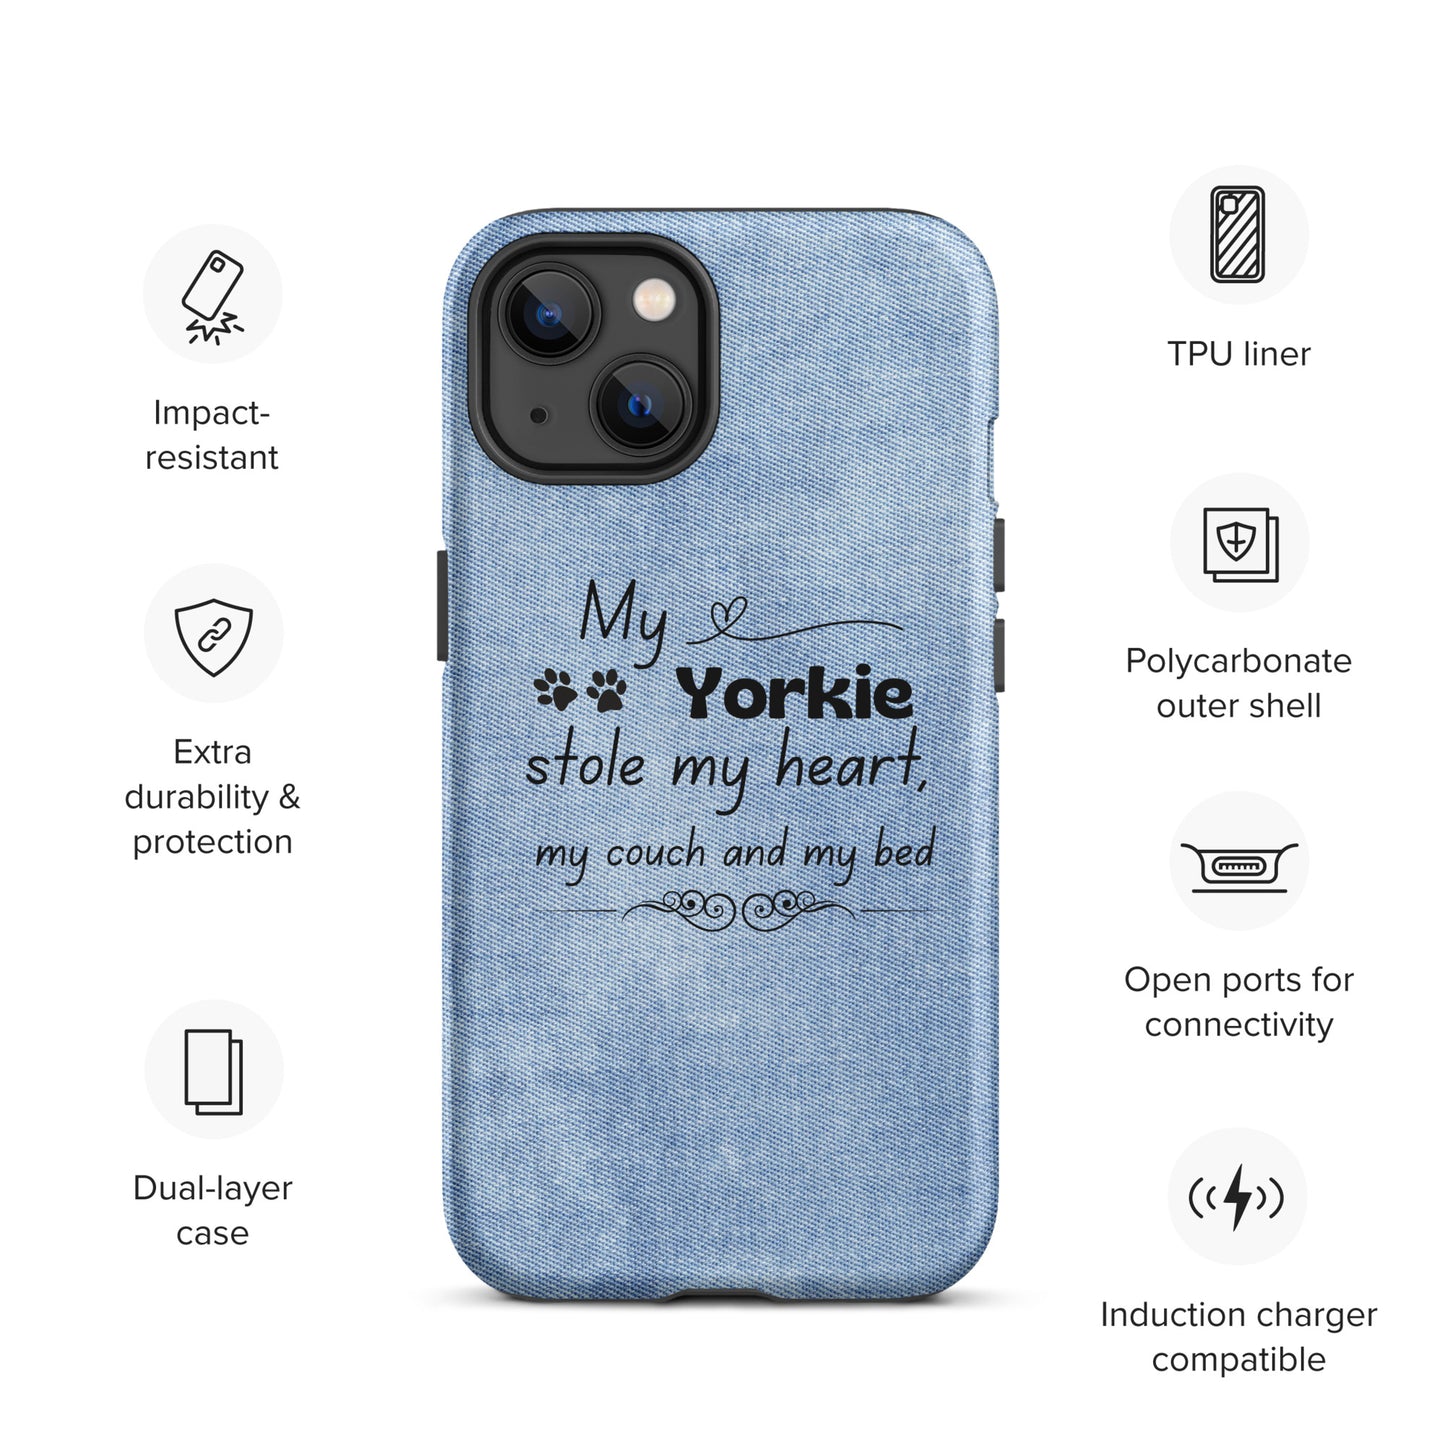 iPhone case 'My Yorkie stole my heart..'